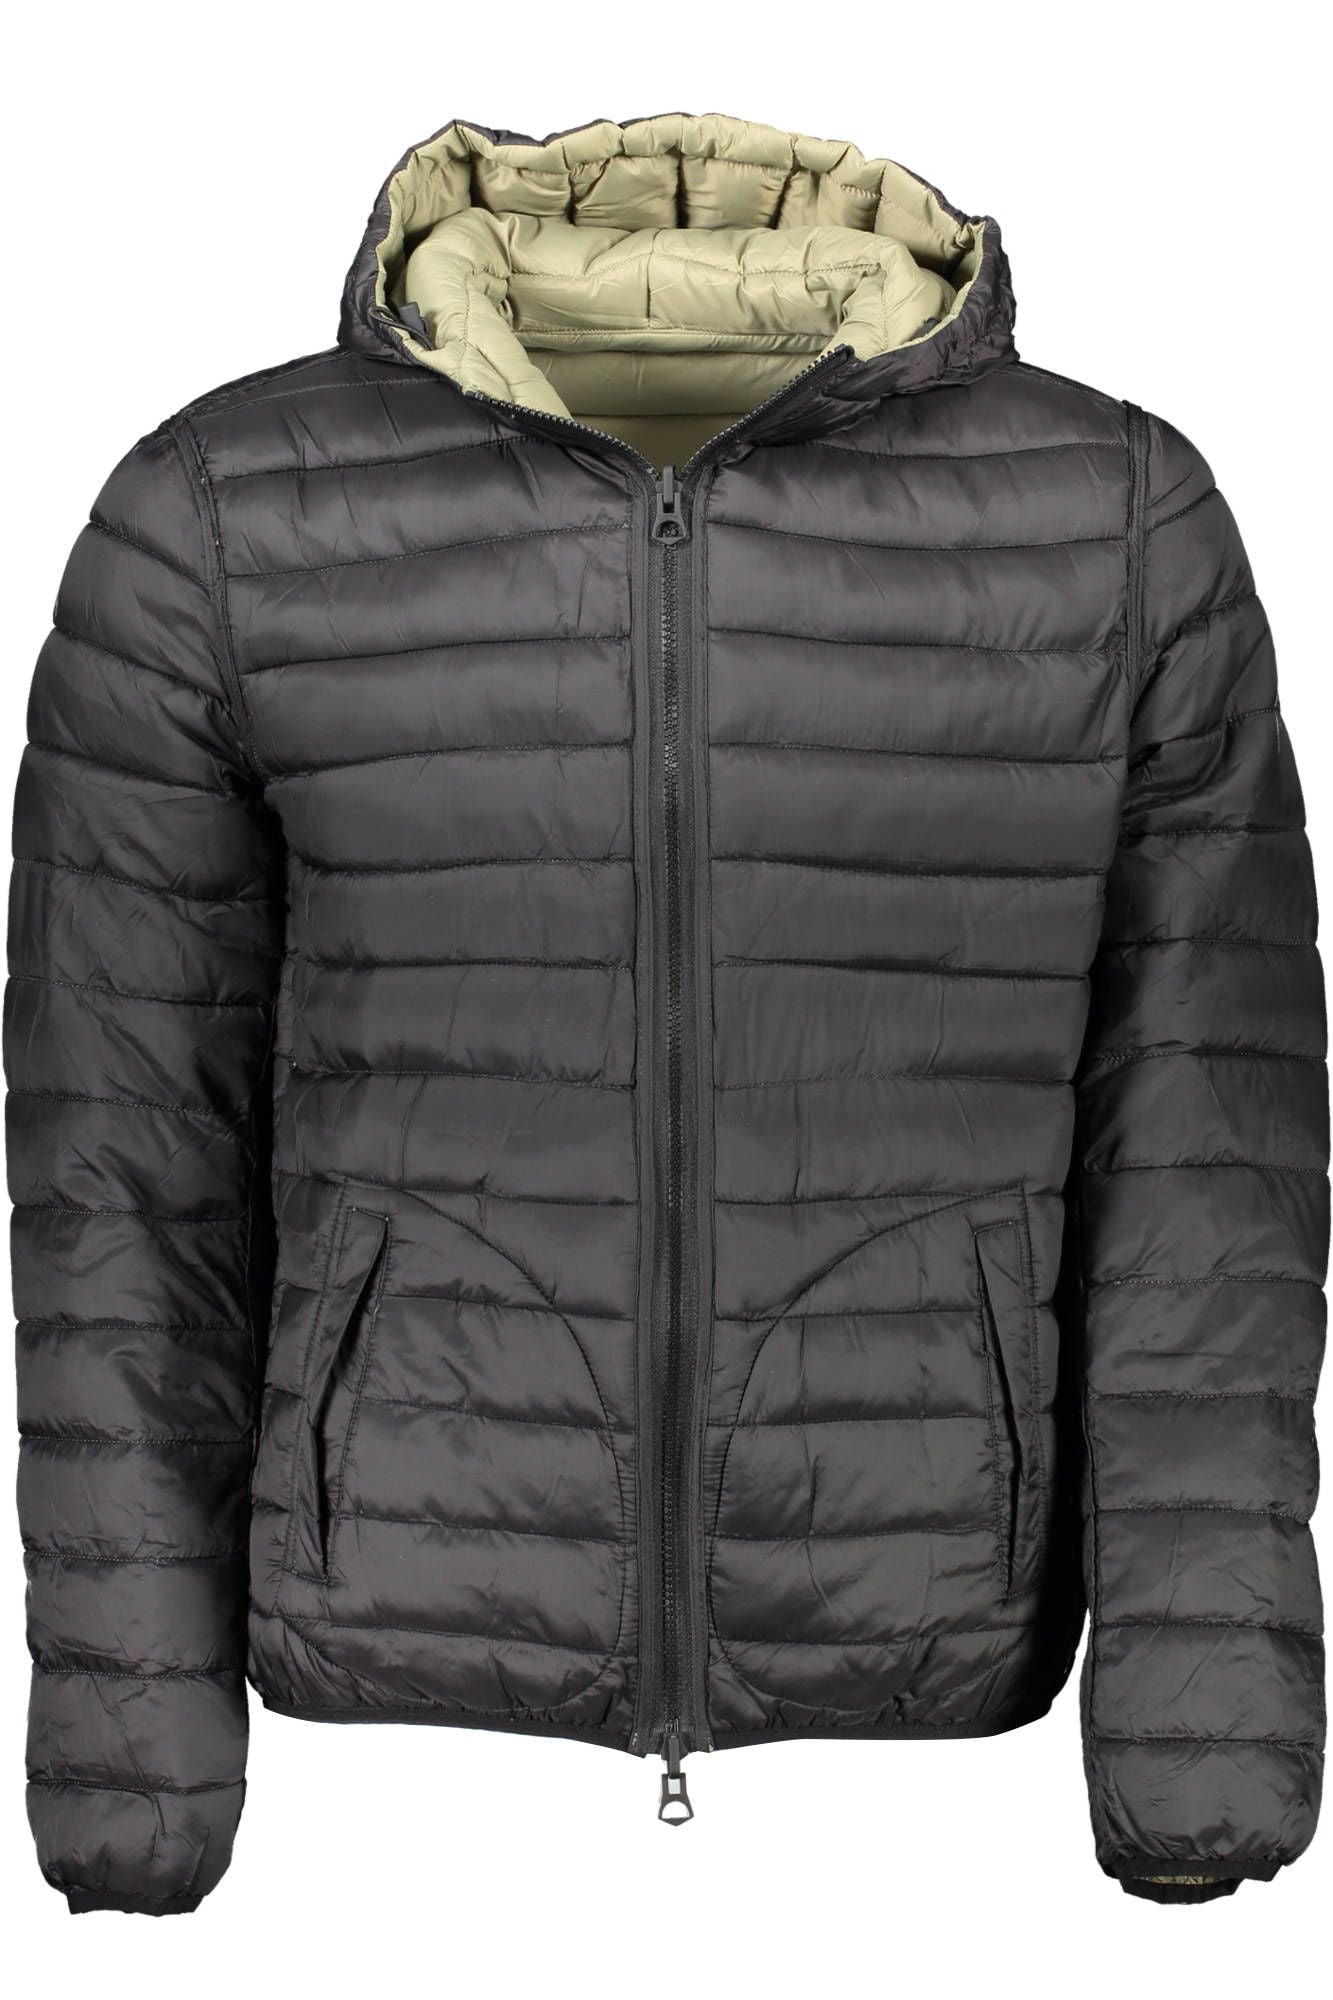 U.S. POLO ASSN. Reversible Hooded Jacket in Lush Green